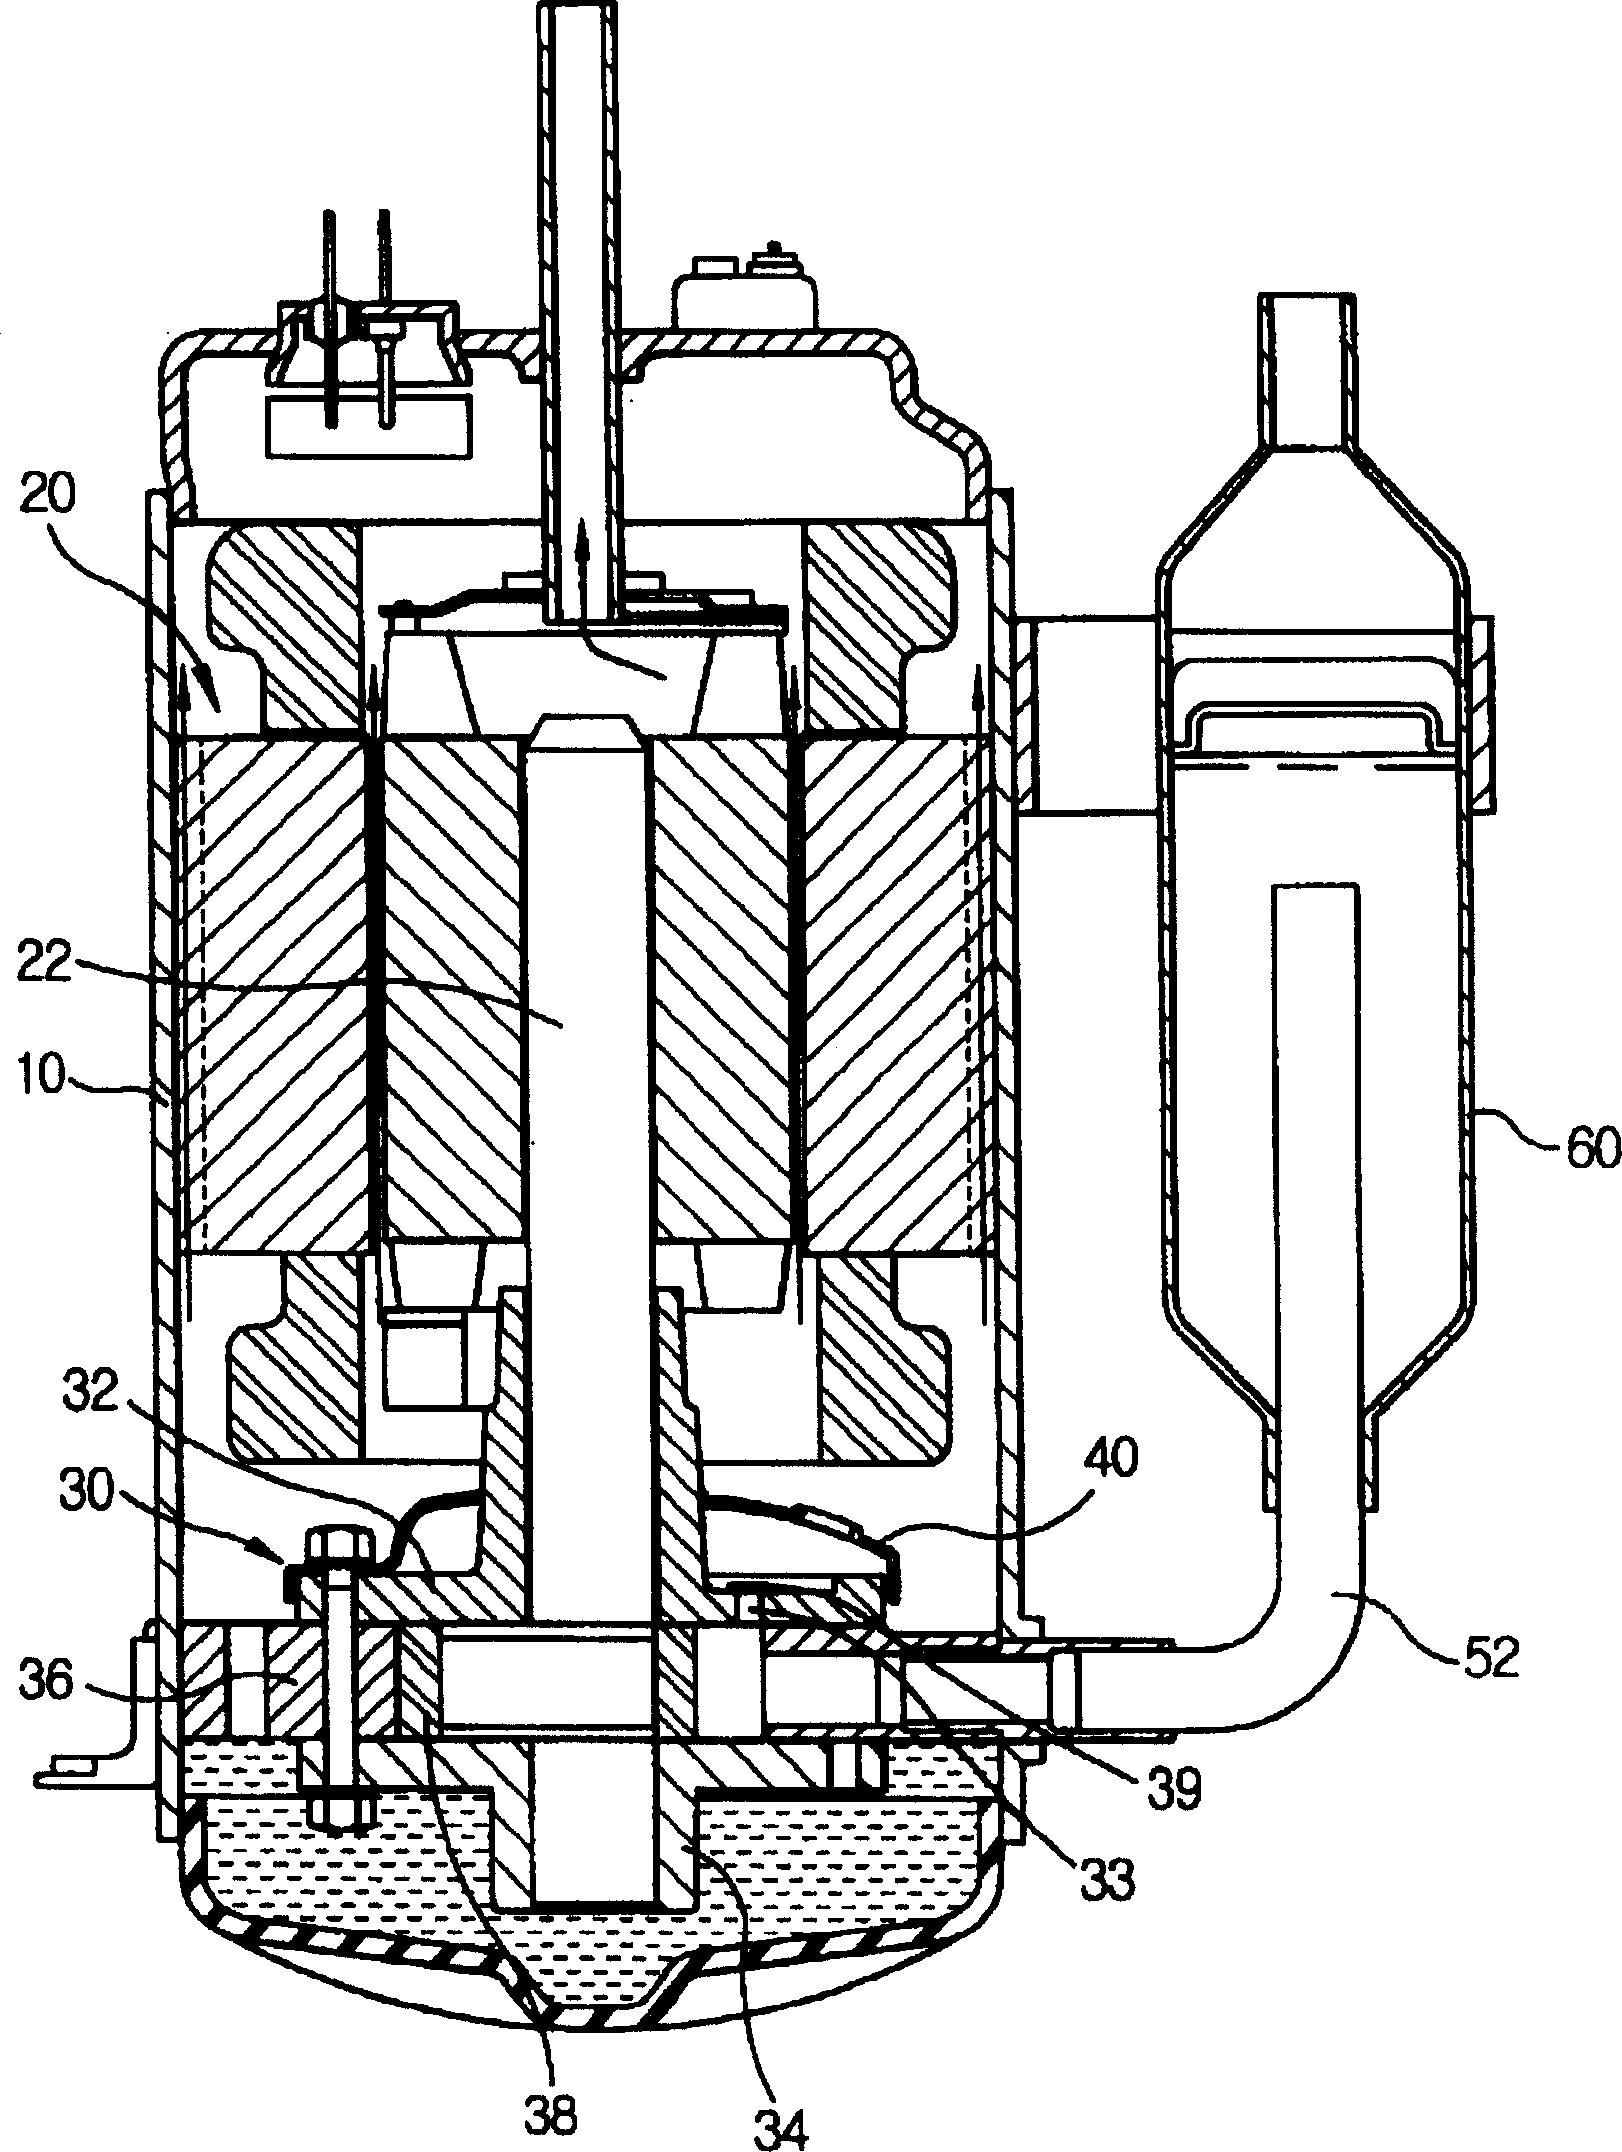 Exhausting silencing apparatus for air-tight rotary compressor